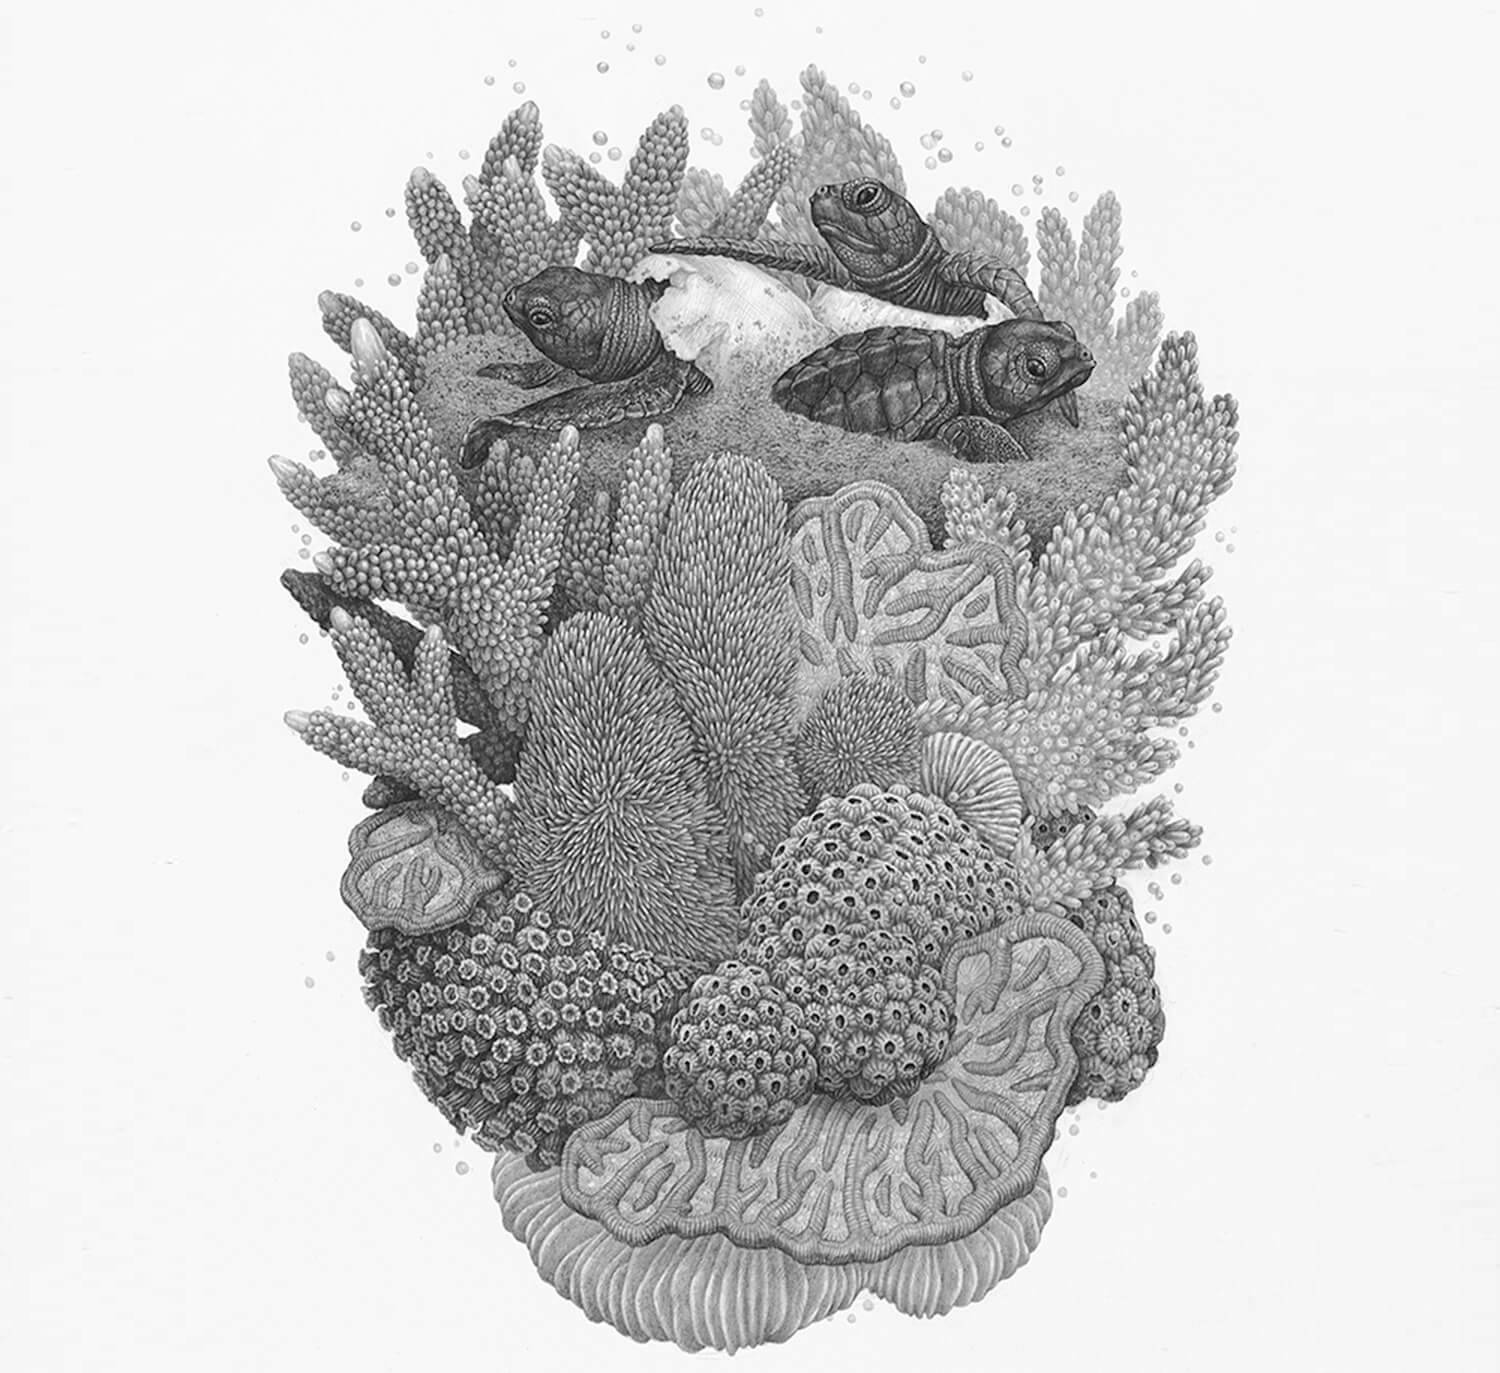 Drawing of turtles and coral